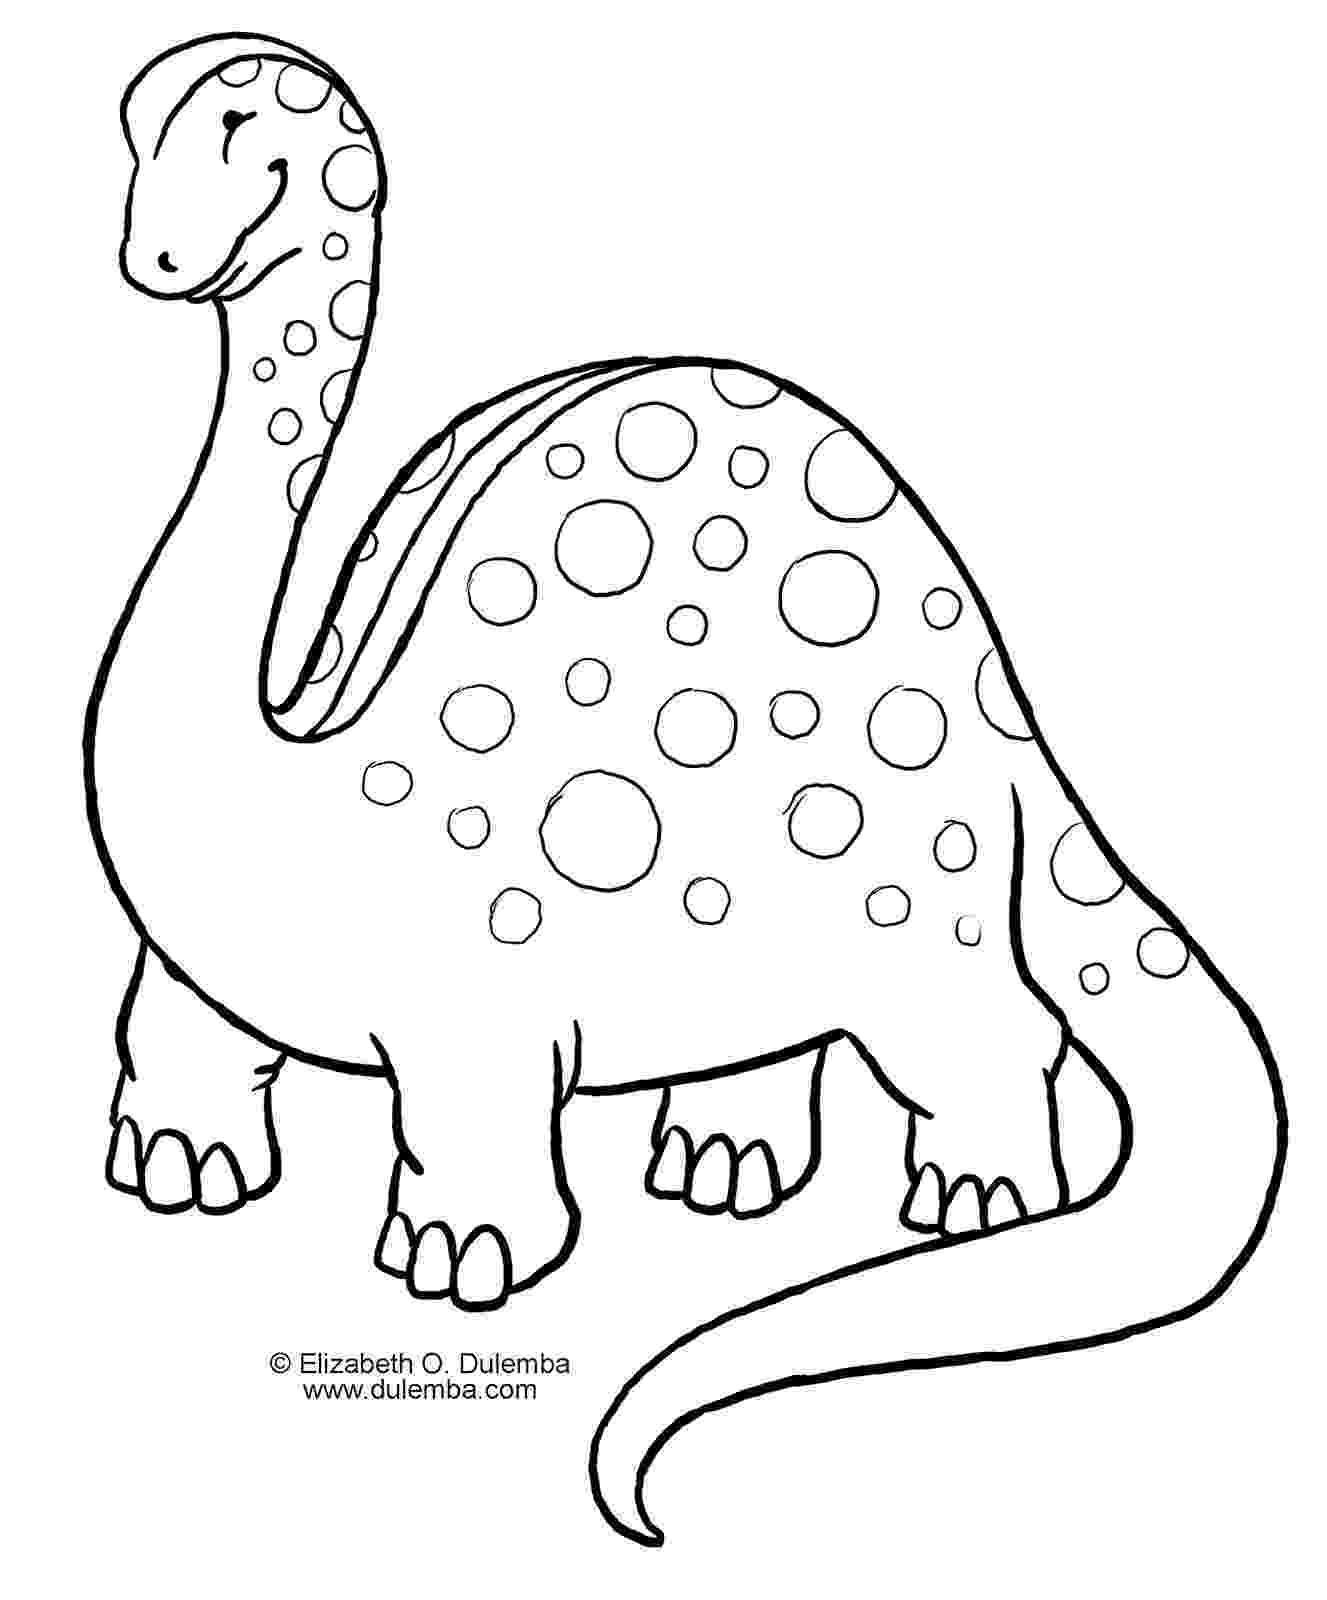 dinosaur for coloring baby dinosaur coloring pages to download and print for free for coloring dinosaur 